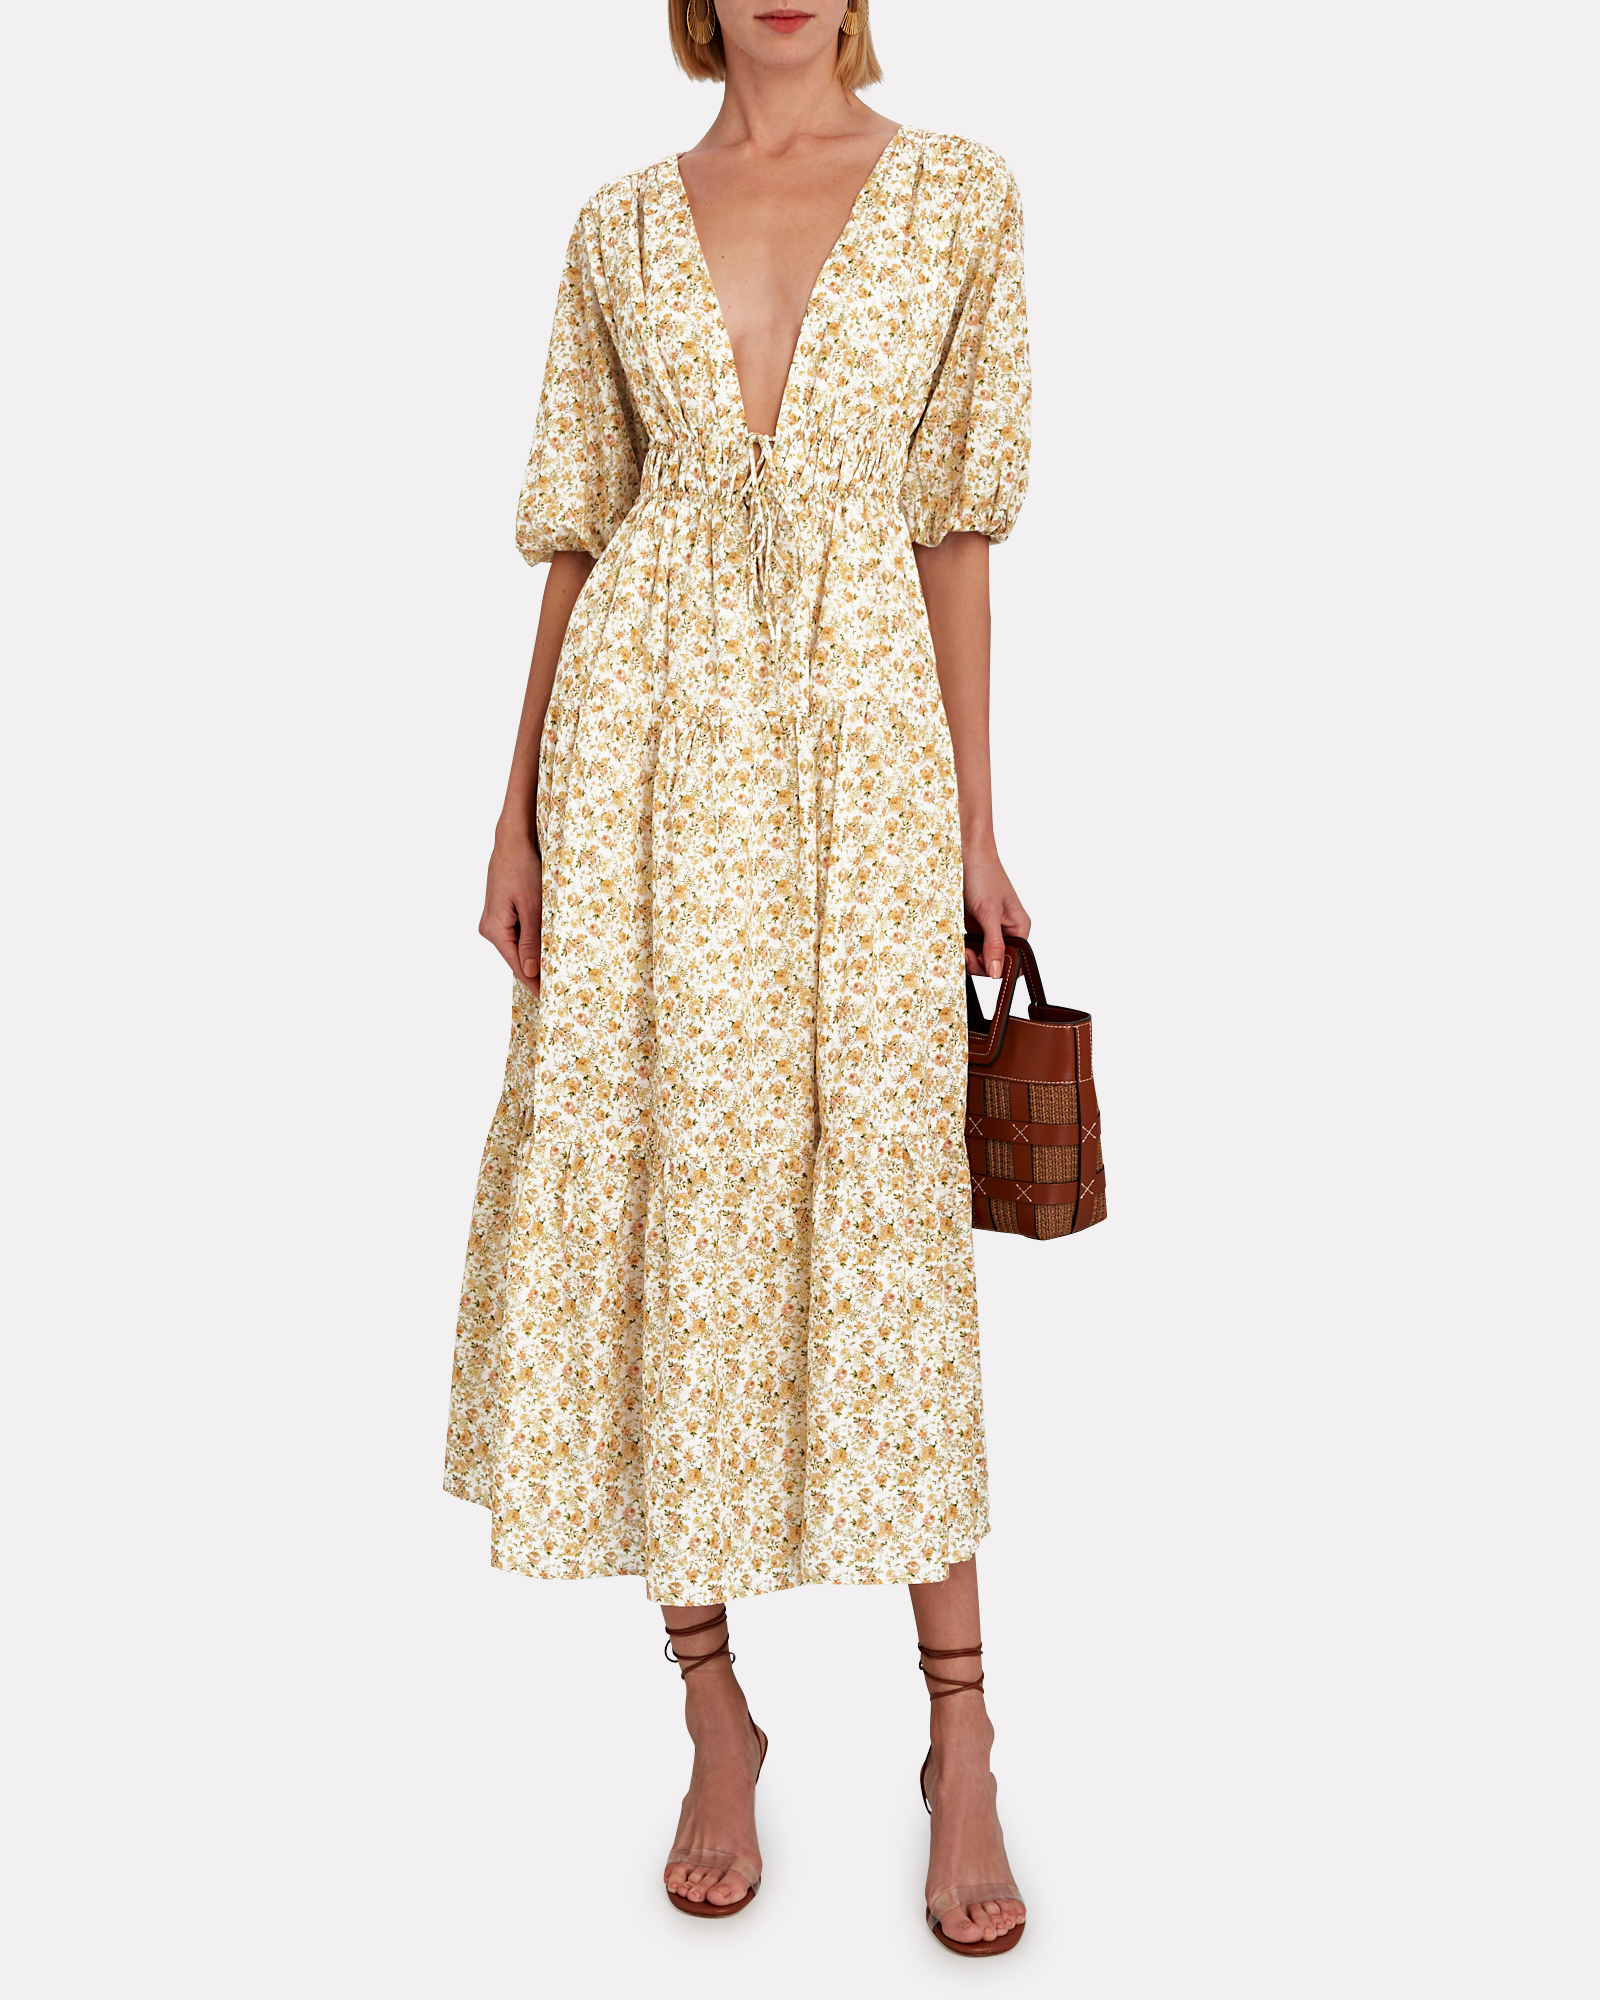 Significant Other Adele Rosalie Floral Midi Dress | INTERMIX®